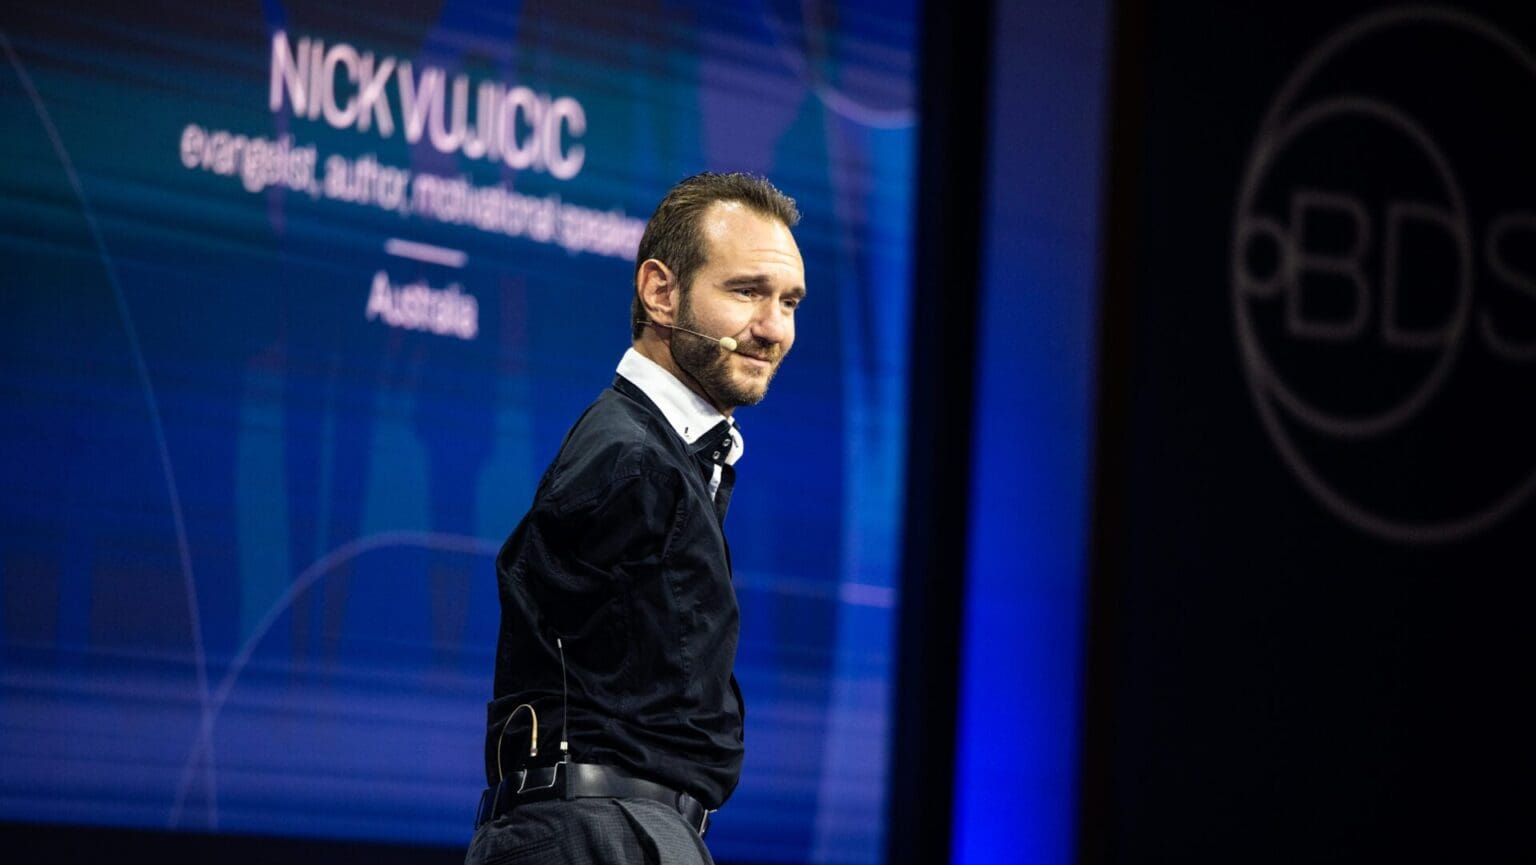 ‘May God Bless the Hungarians for Their Decision to Restore the Natural Order of Life in Their Country’ — An Interview with Nick Vujicic